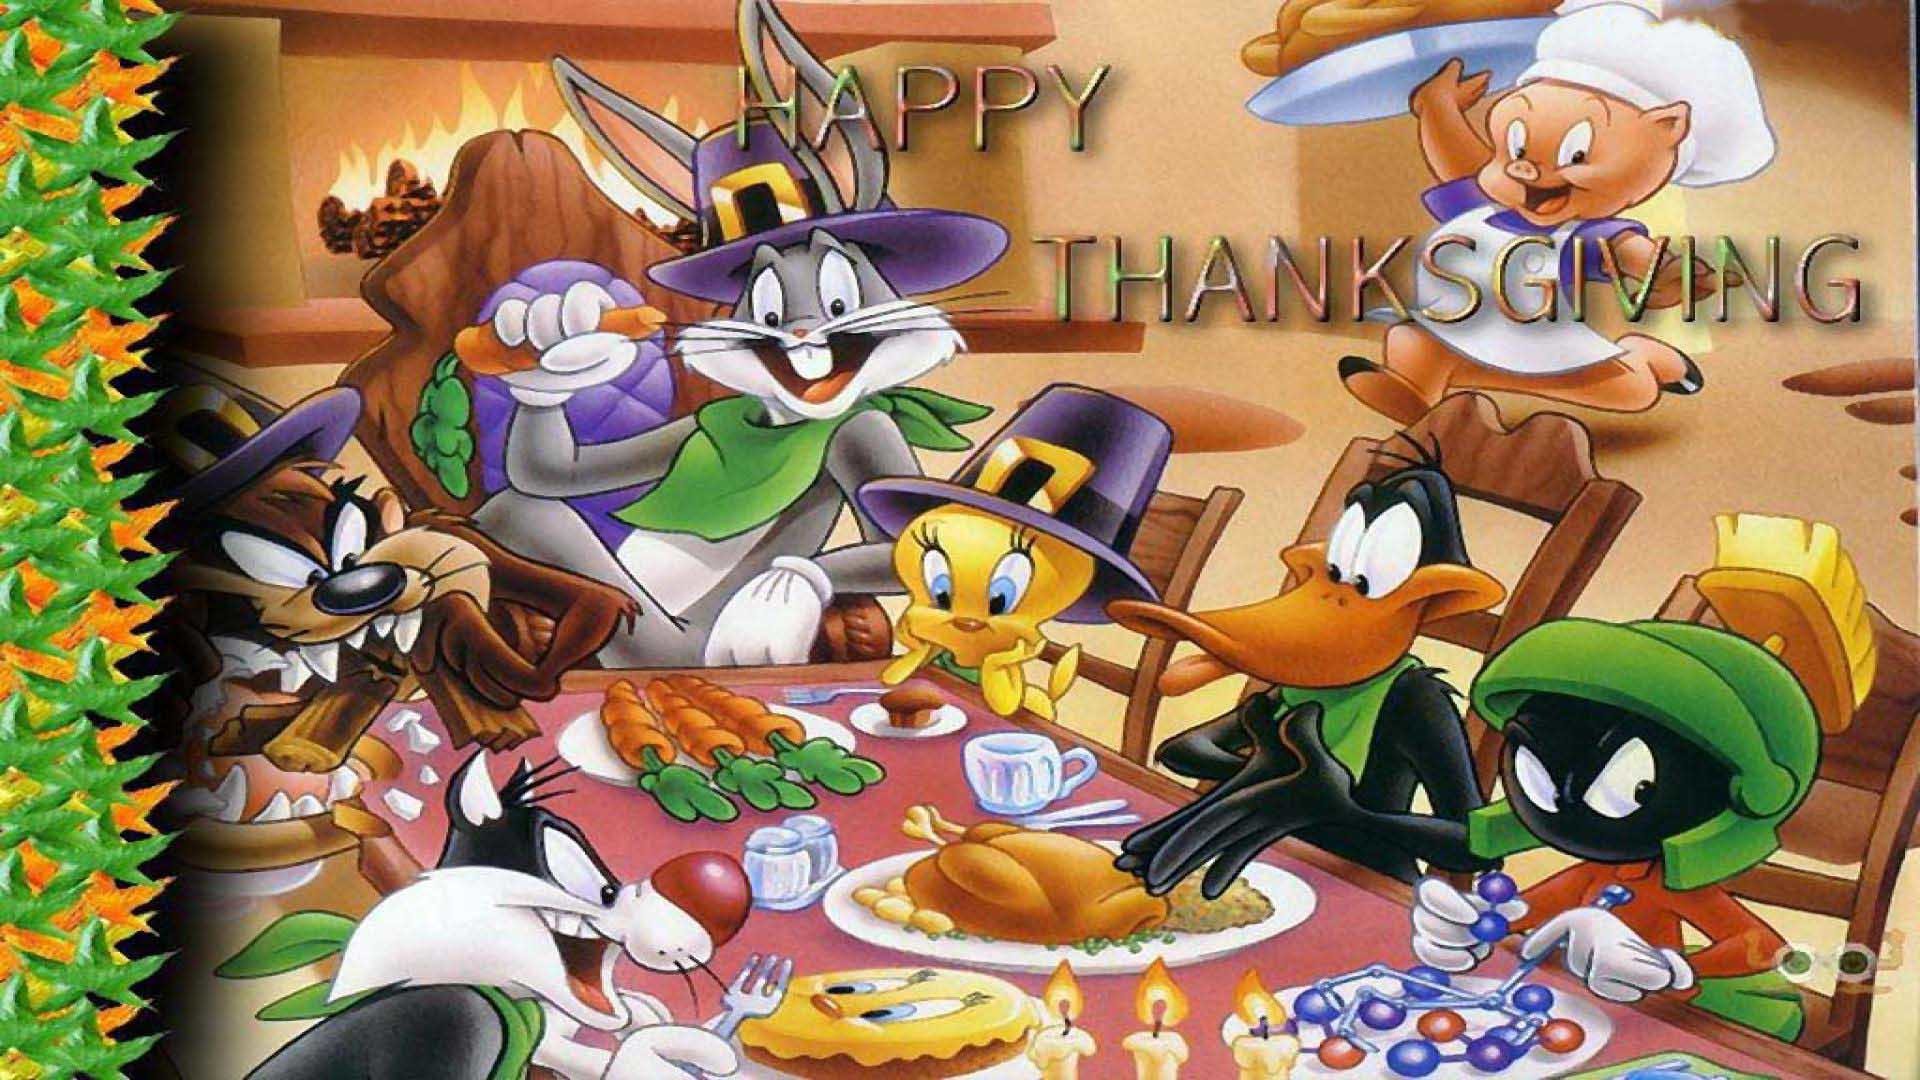 1920x1080 [^Free Disney*] Thanksgiving Day Wallpapers HD Backgrounds Images for  Desktop